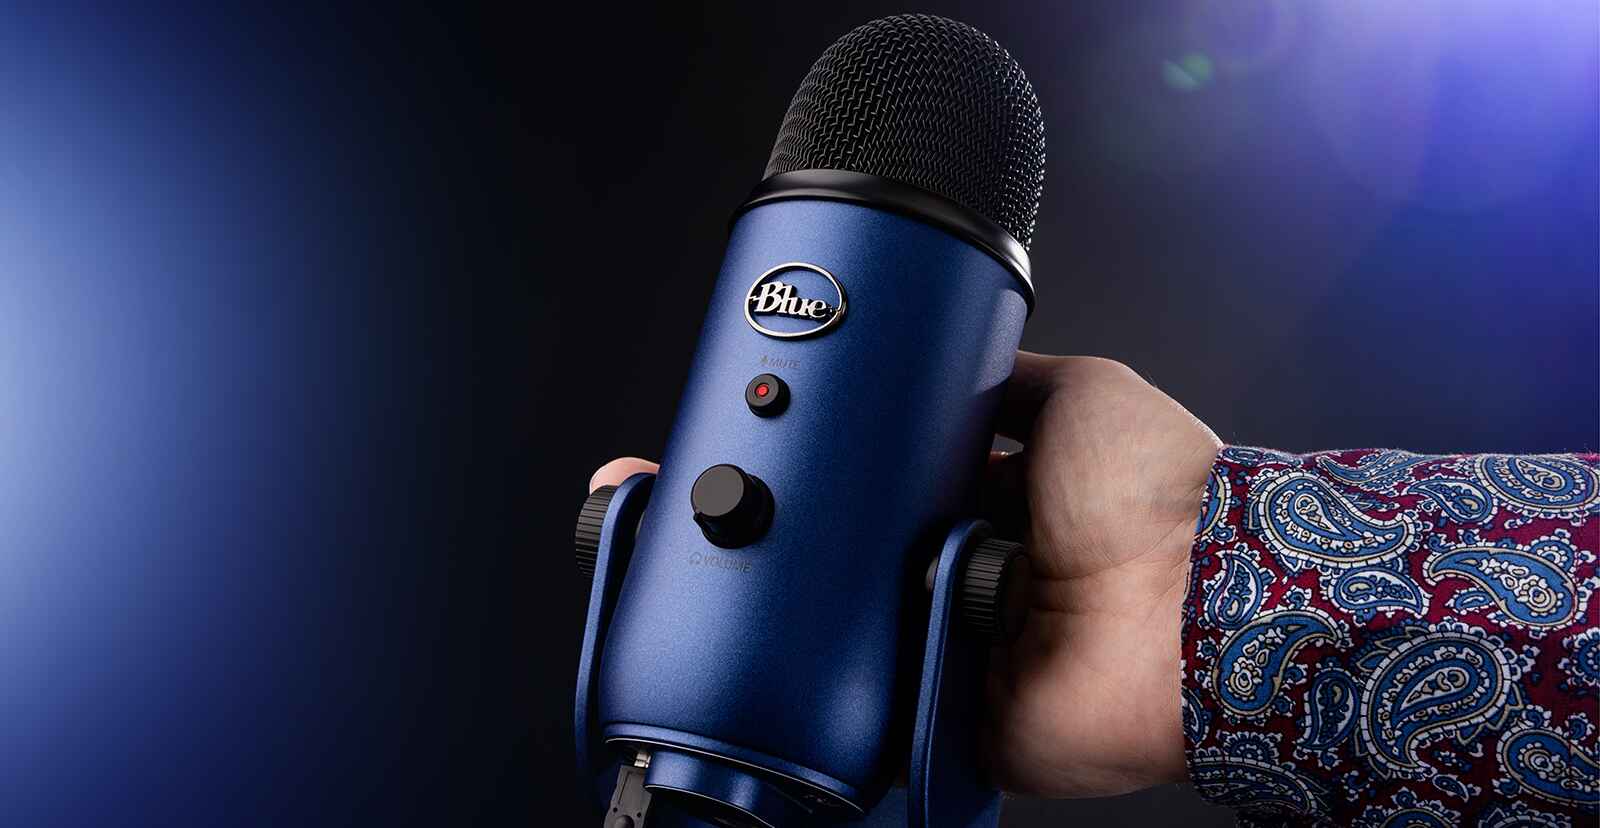 How To Get Blue Yeti USB Microphone Working